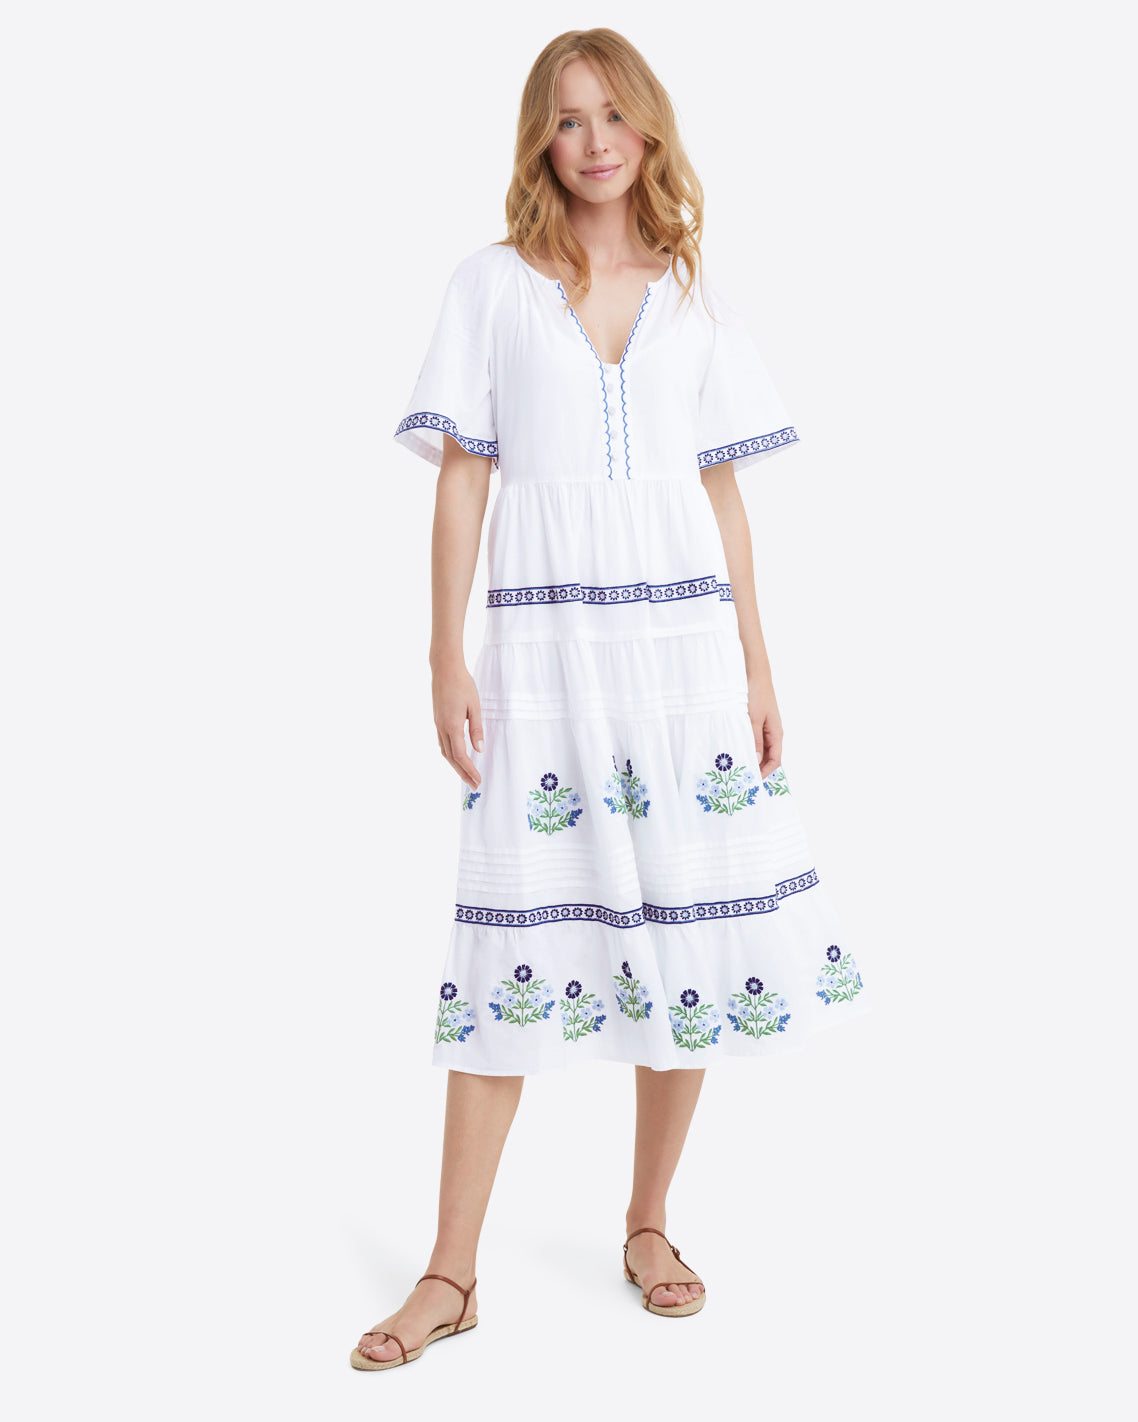 Carlene Midi Dress in Floral Embroidery